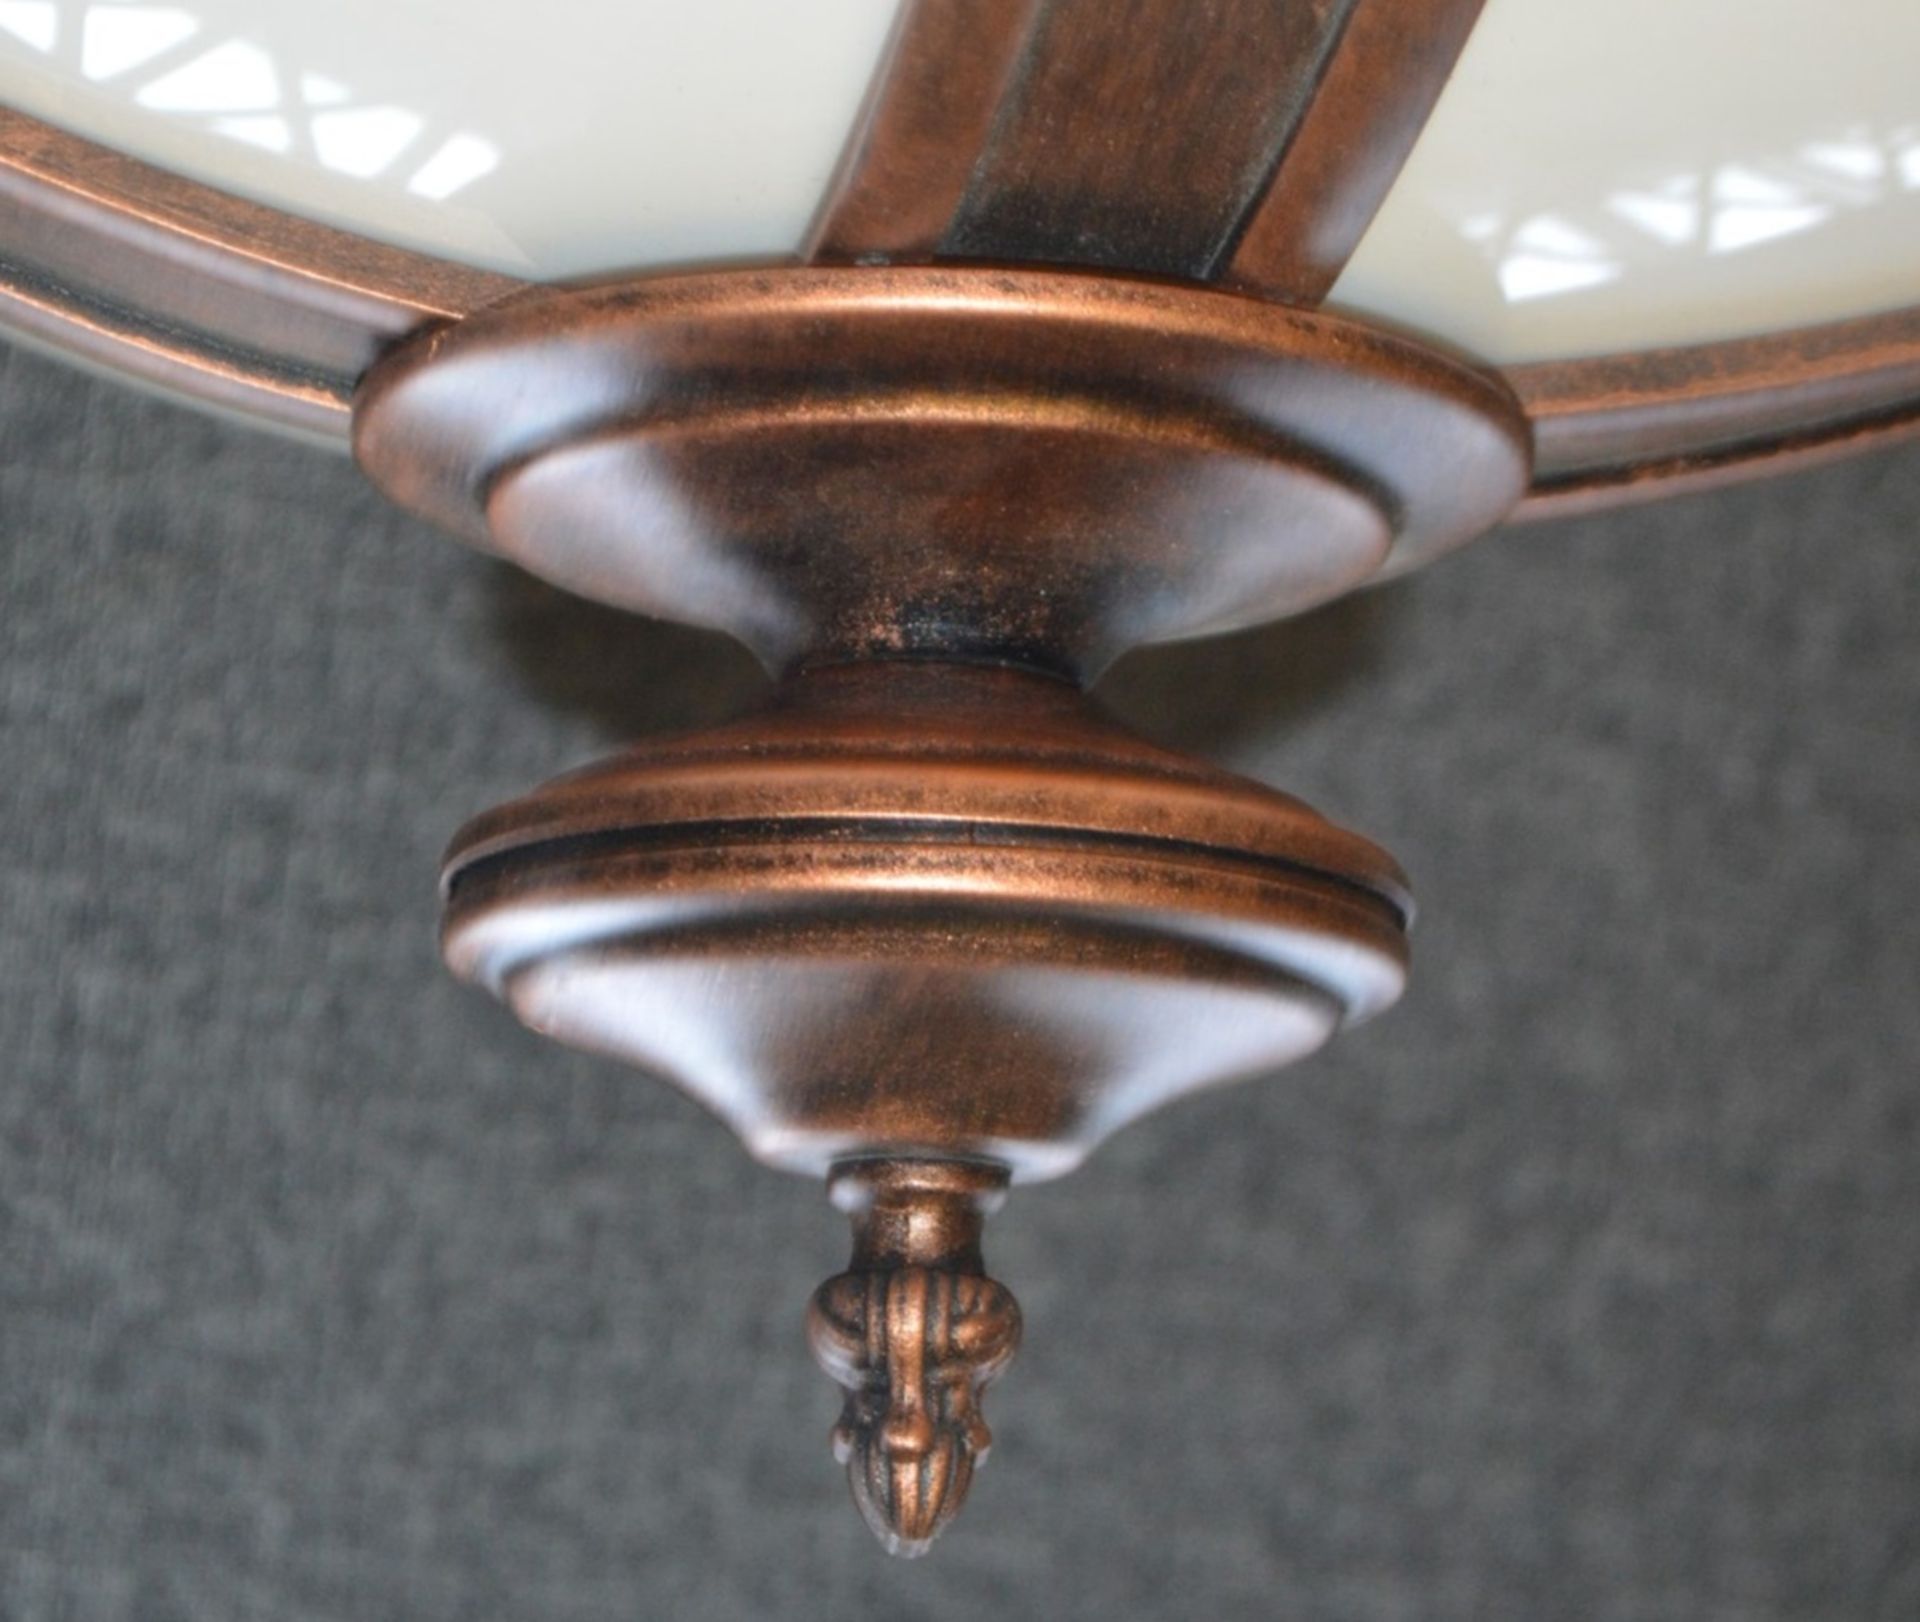 1 x CHELSOM Large Opulent Roman-Style Half Globe Ceiling Light With An Acrylic Opal Shade - Unused - Image 3 of 5